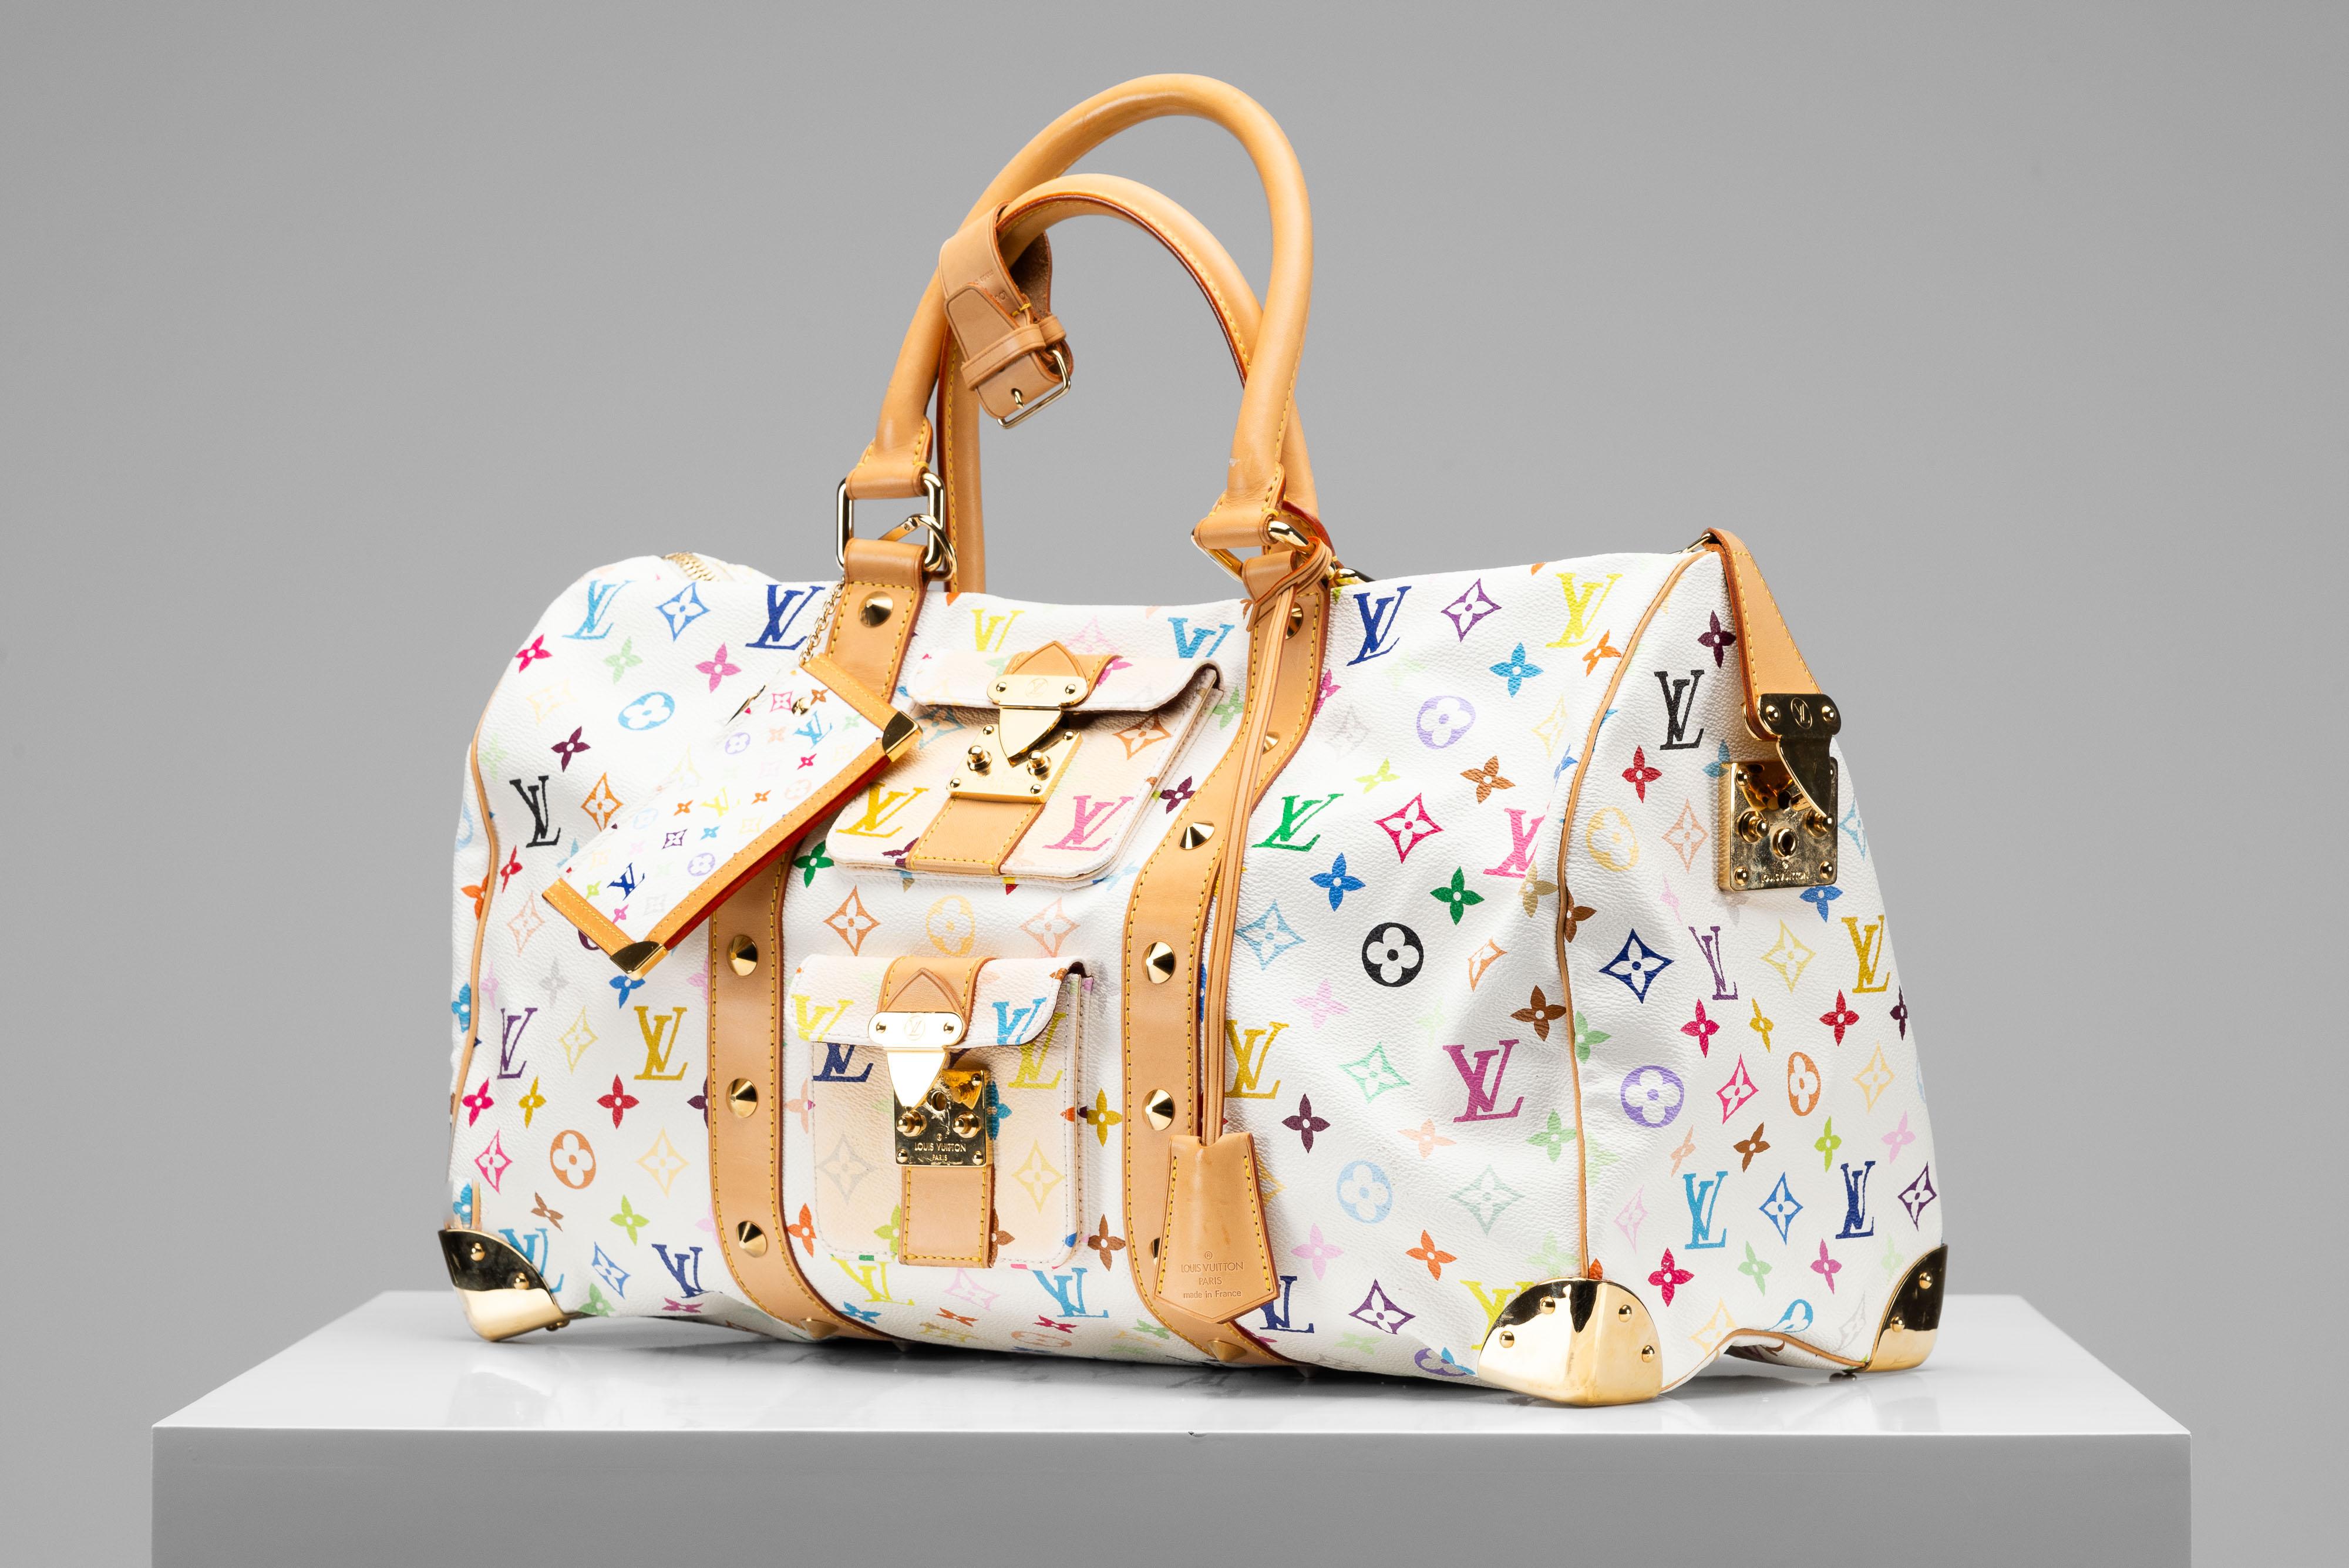 From the collection of SAVINETI we offer this Louis Vuitton Murakami Keepall:
-    Brand: Louis Vuitton
-    Model: Murakami Keepall
-    Color: White Multicolor Monogram
-    Year: 2003
-    Serial number: FL1023
-    Condition: Good Condition